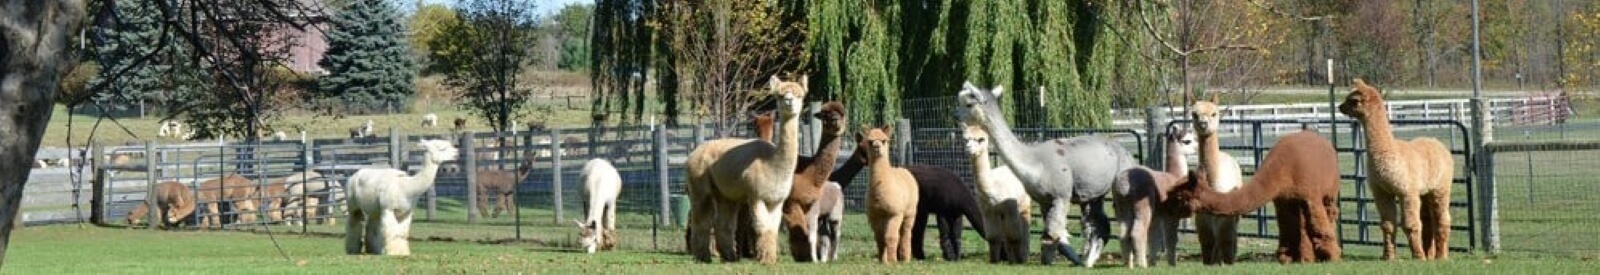 Fun in the Country Alpacas